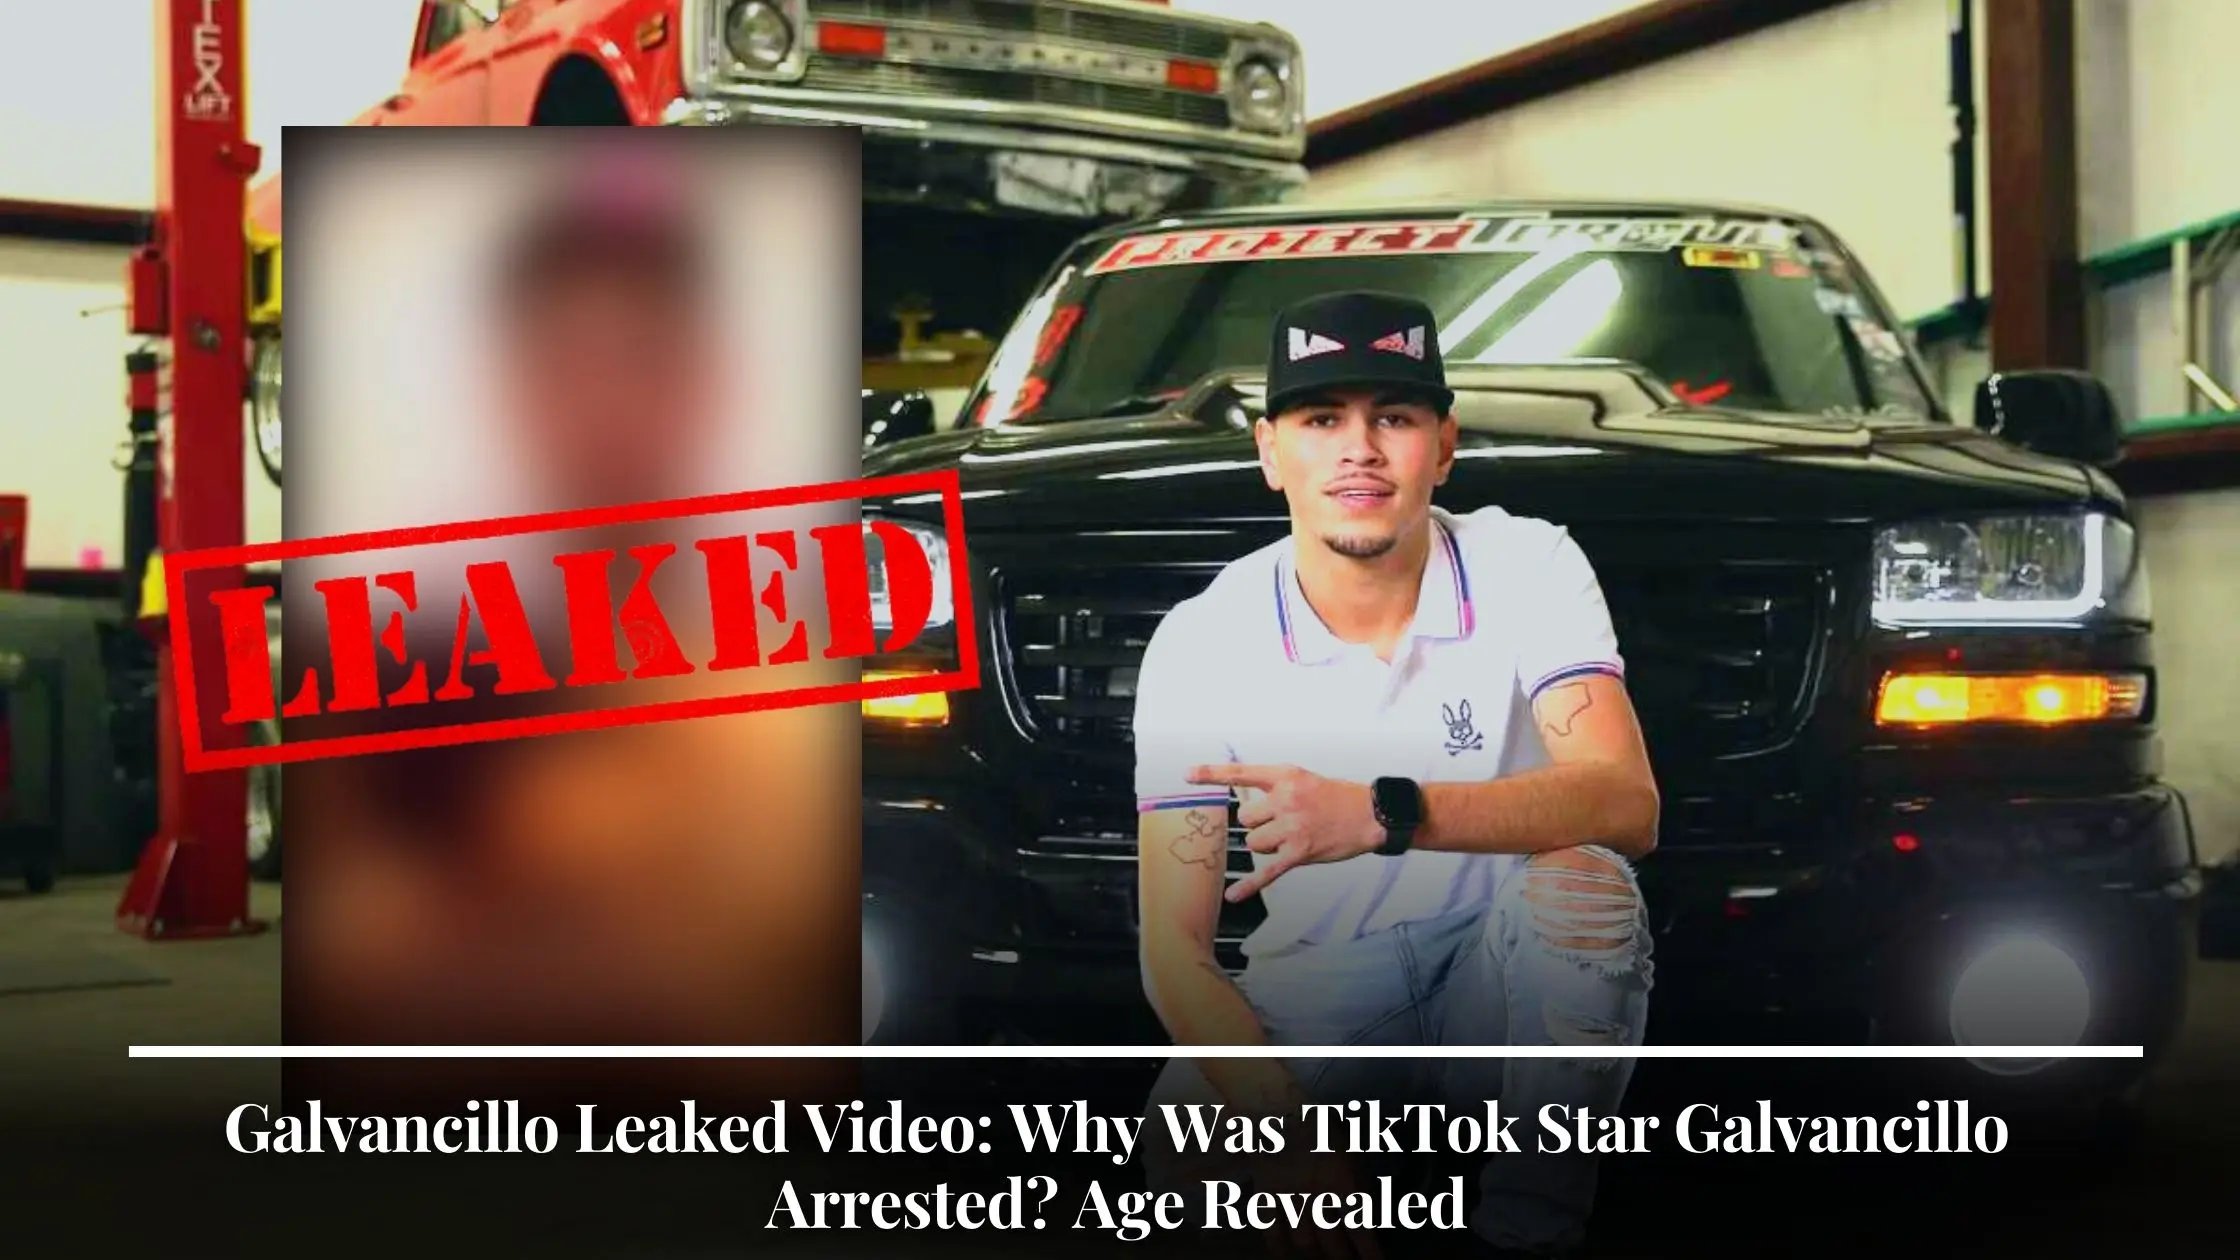 Galvancillo Leaked Video Why Was TikTok Star Galvancillo Arrested Age Revealed